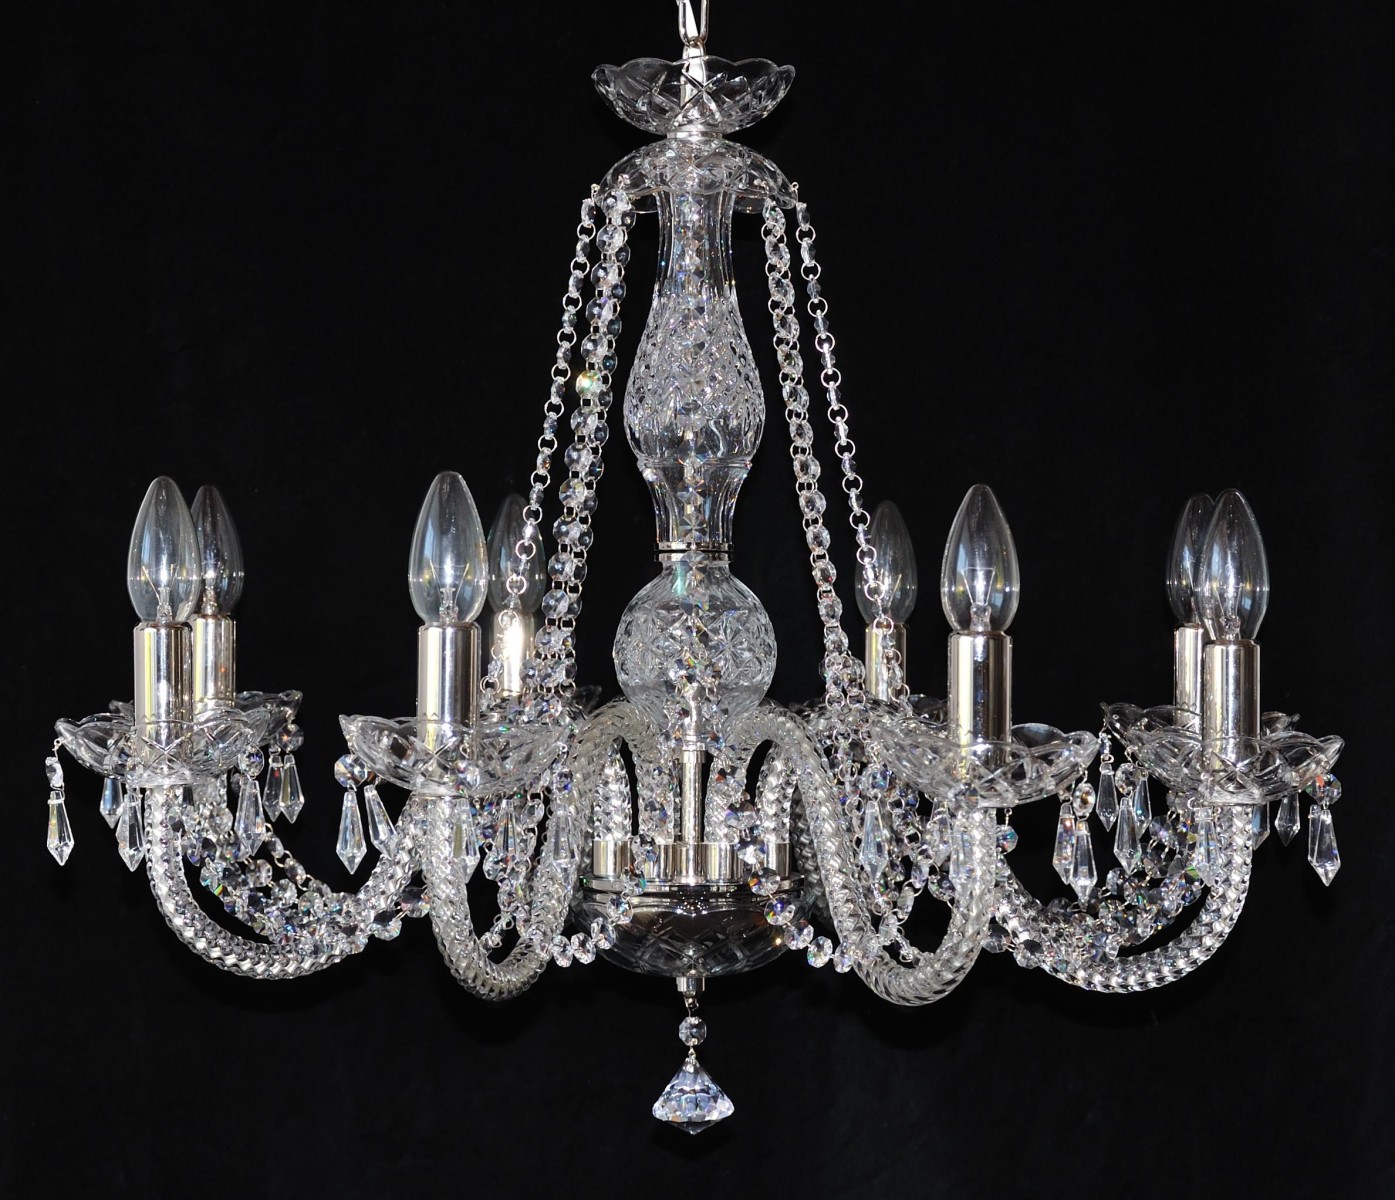 8 Arms Plain Crystal Chandelier With, What Is A Crystal Chandelier